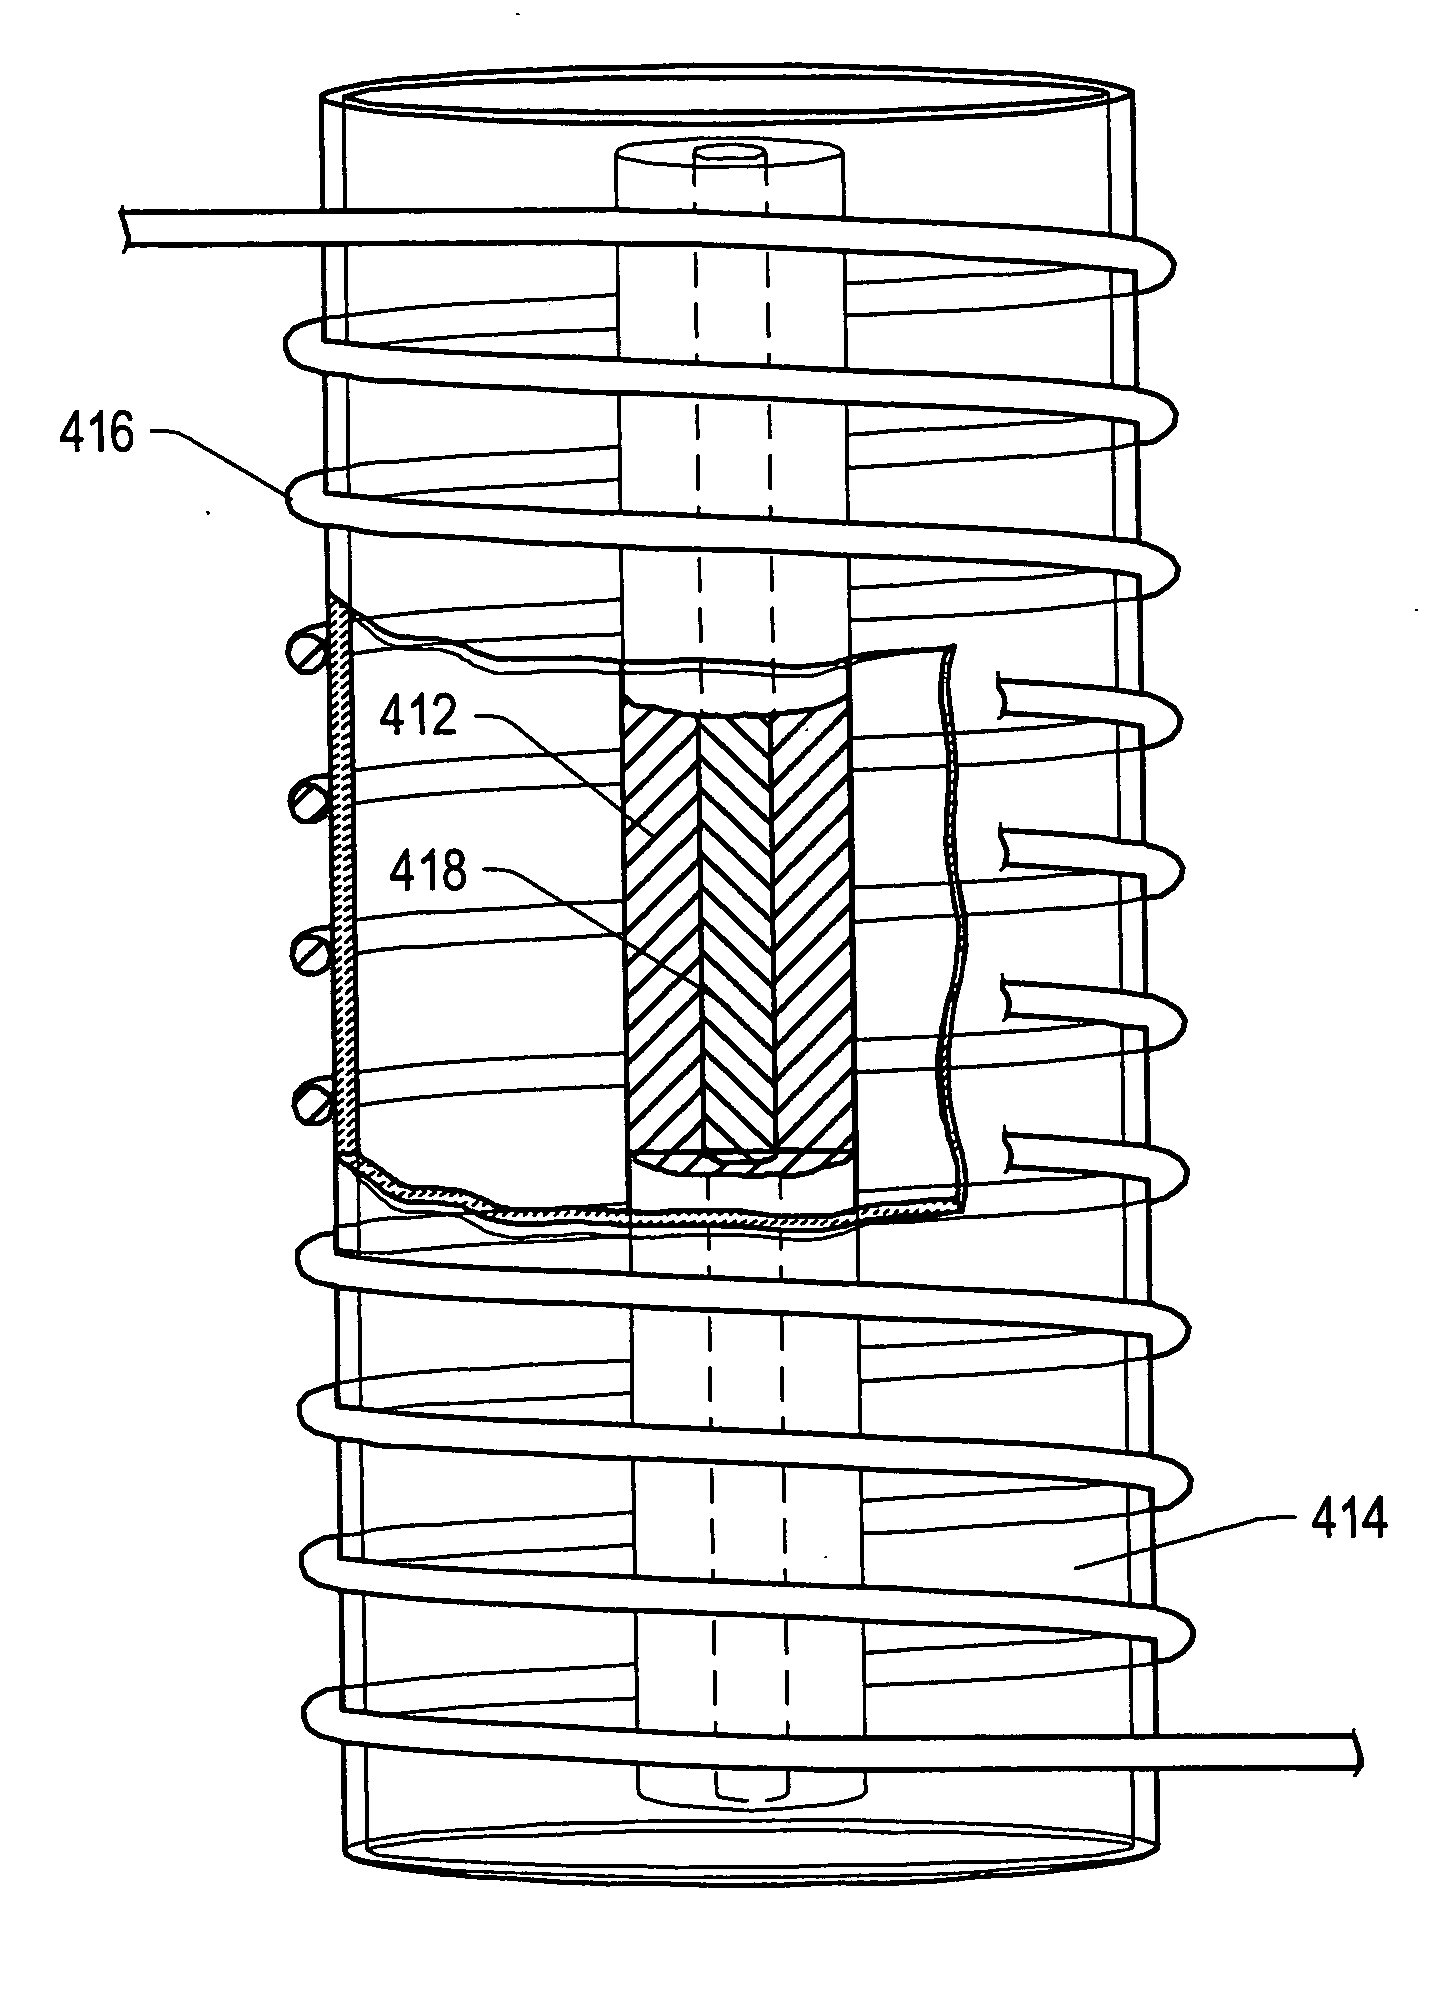 Temperature limited heaters with thermally conductive fluid used to heat subsurface formations